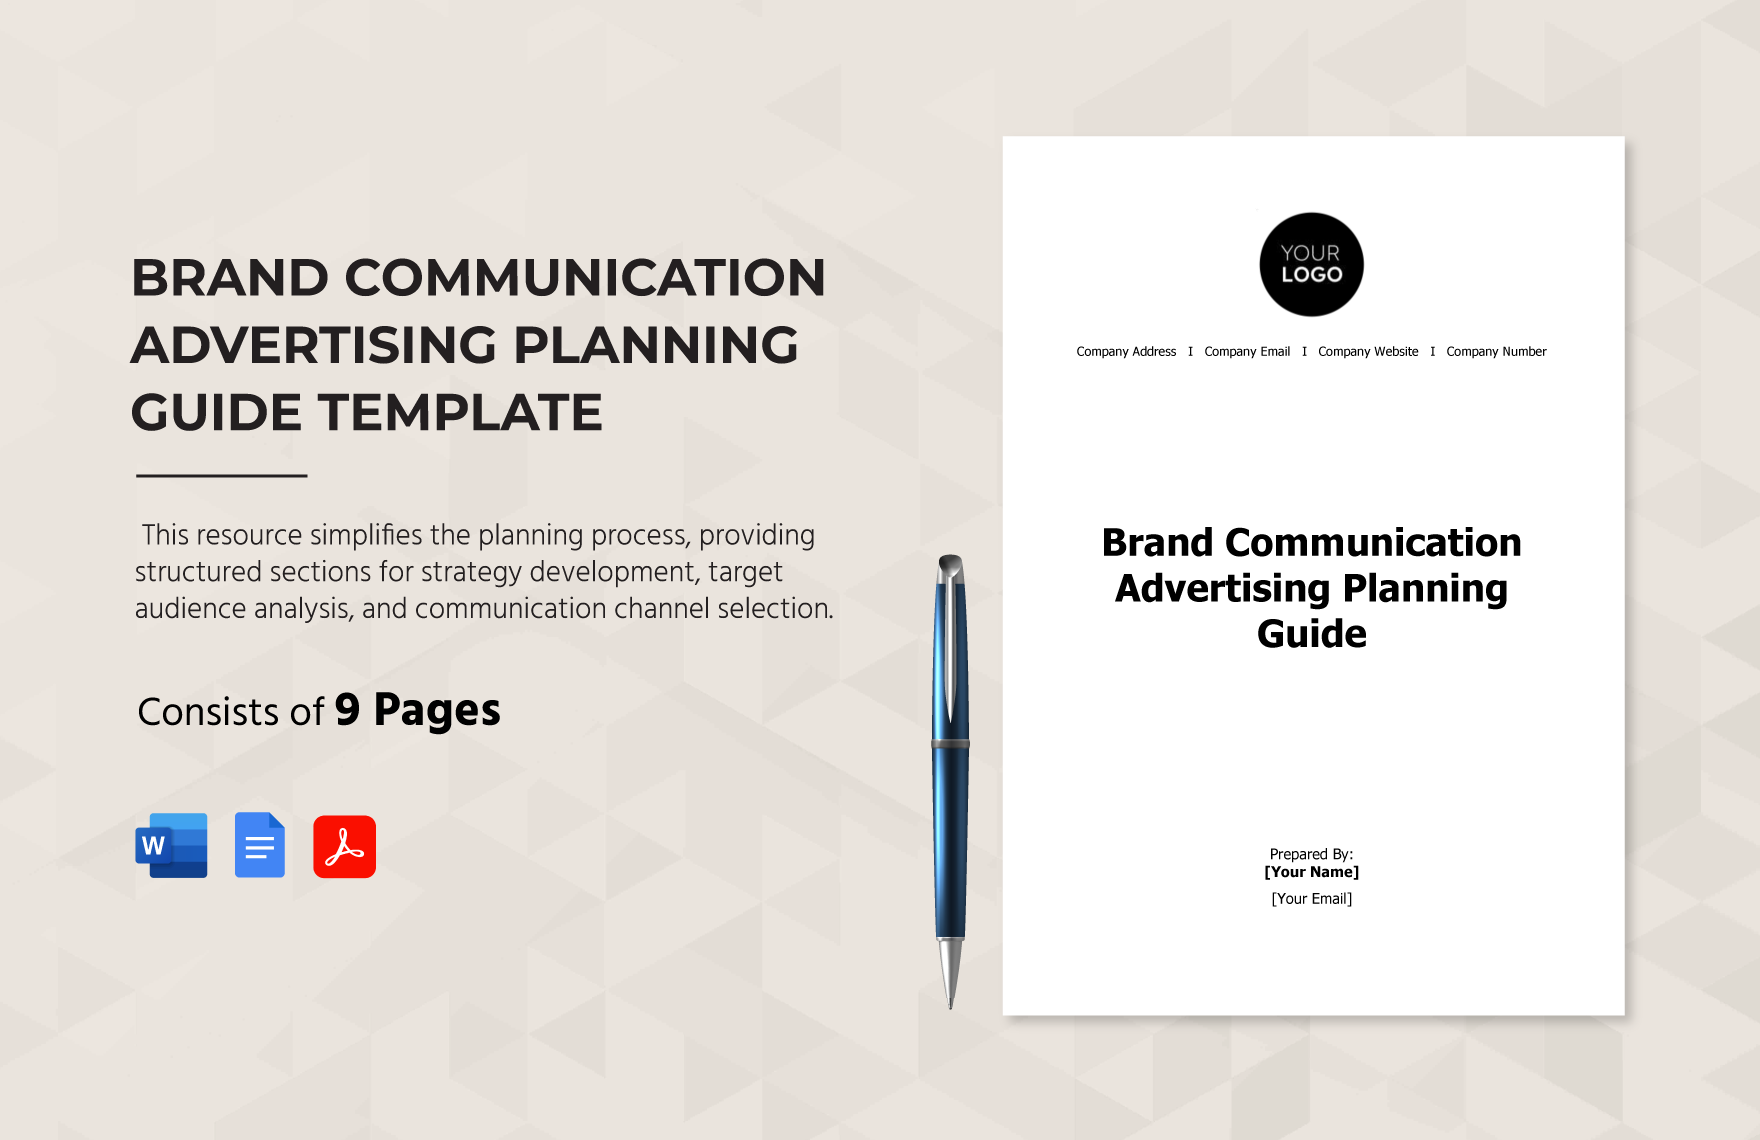 brand communication advertising planning guide template 1qvtf